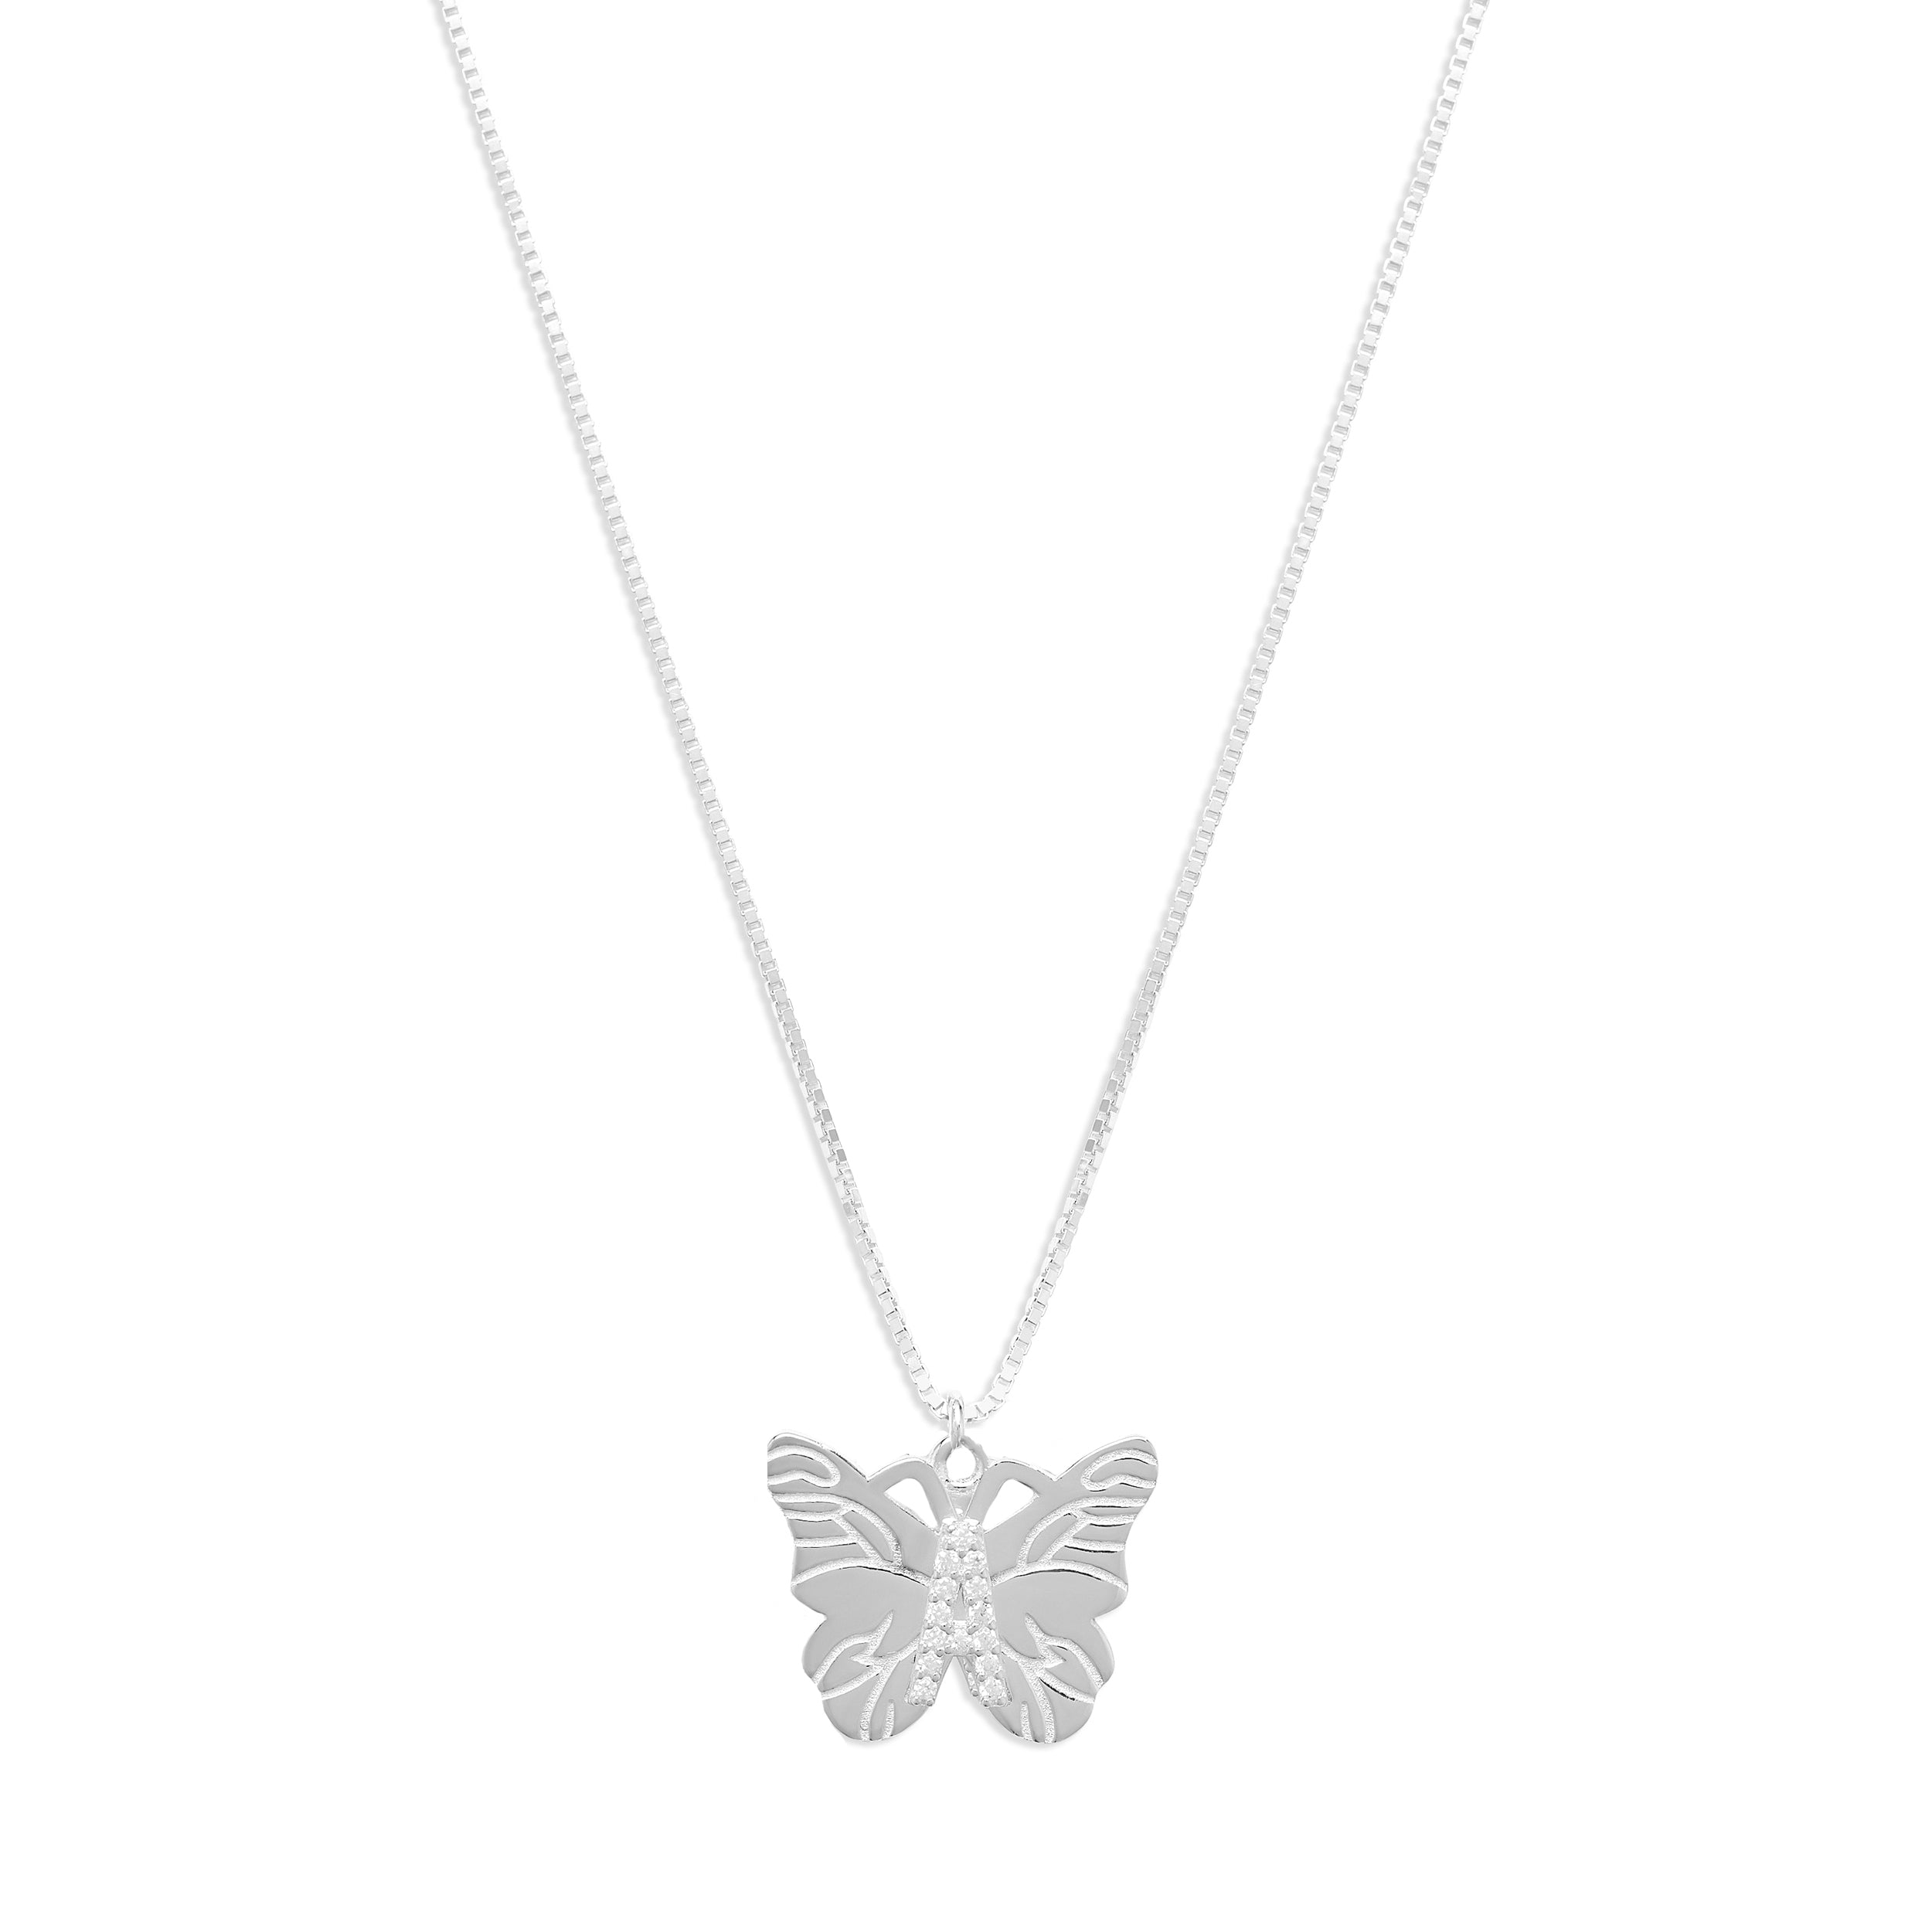 Monarch Butterfly Initial Necklace – Miriam Merenfeld Jewelry